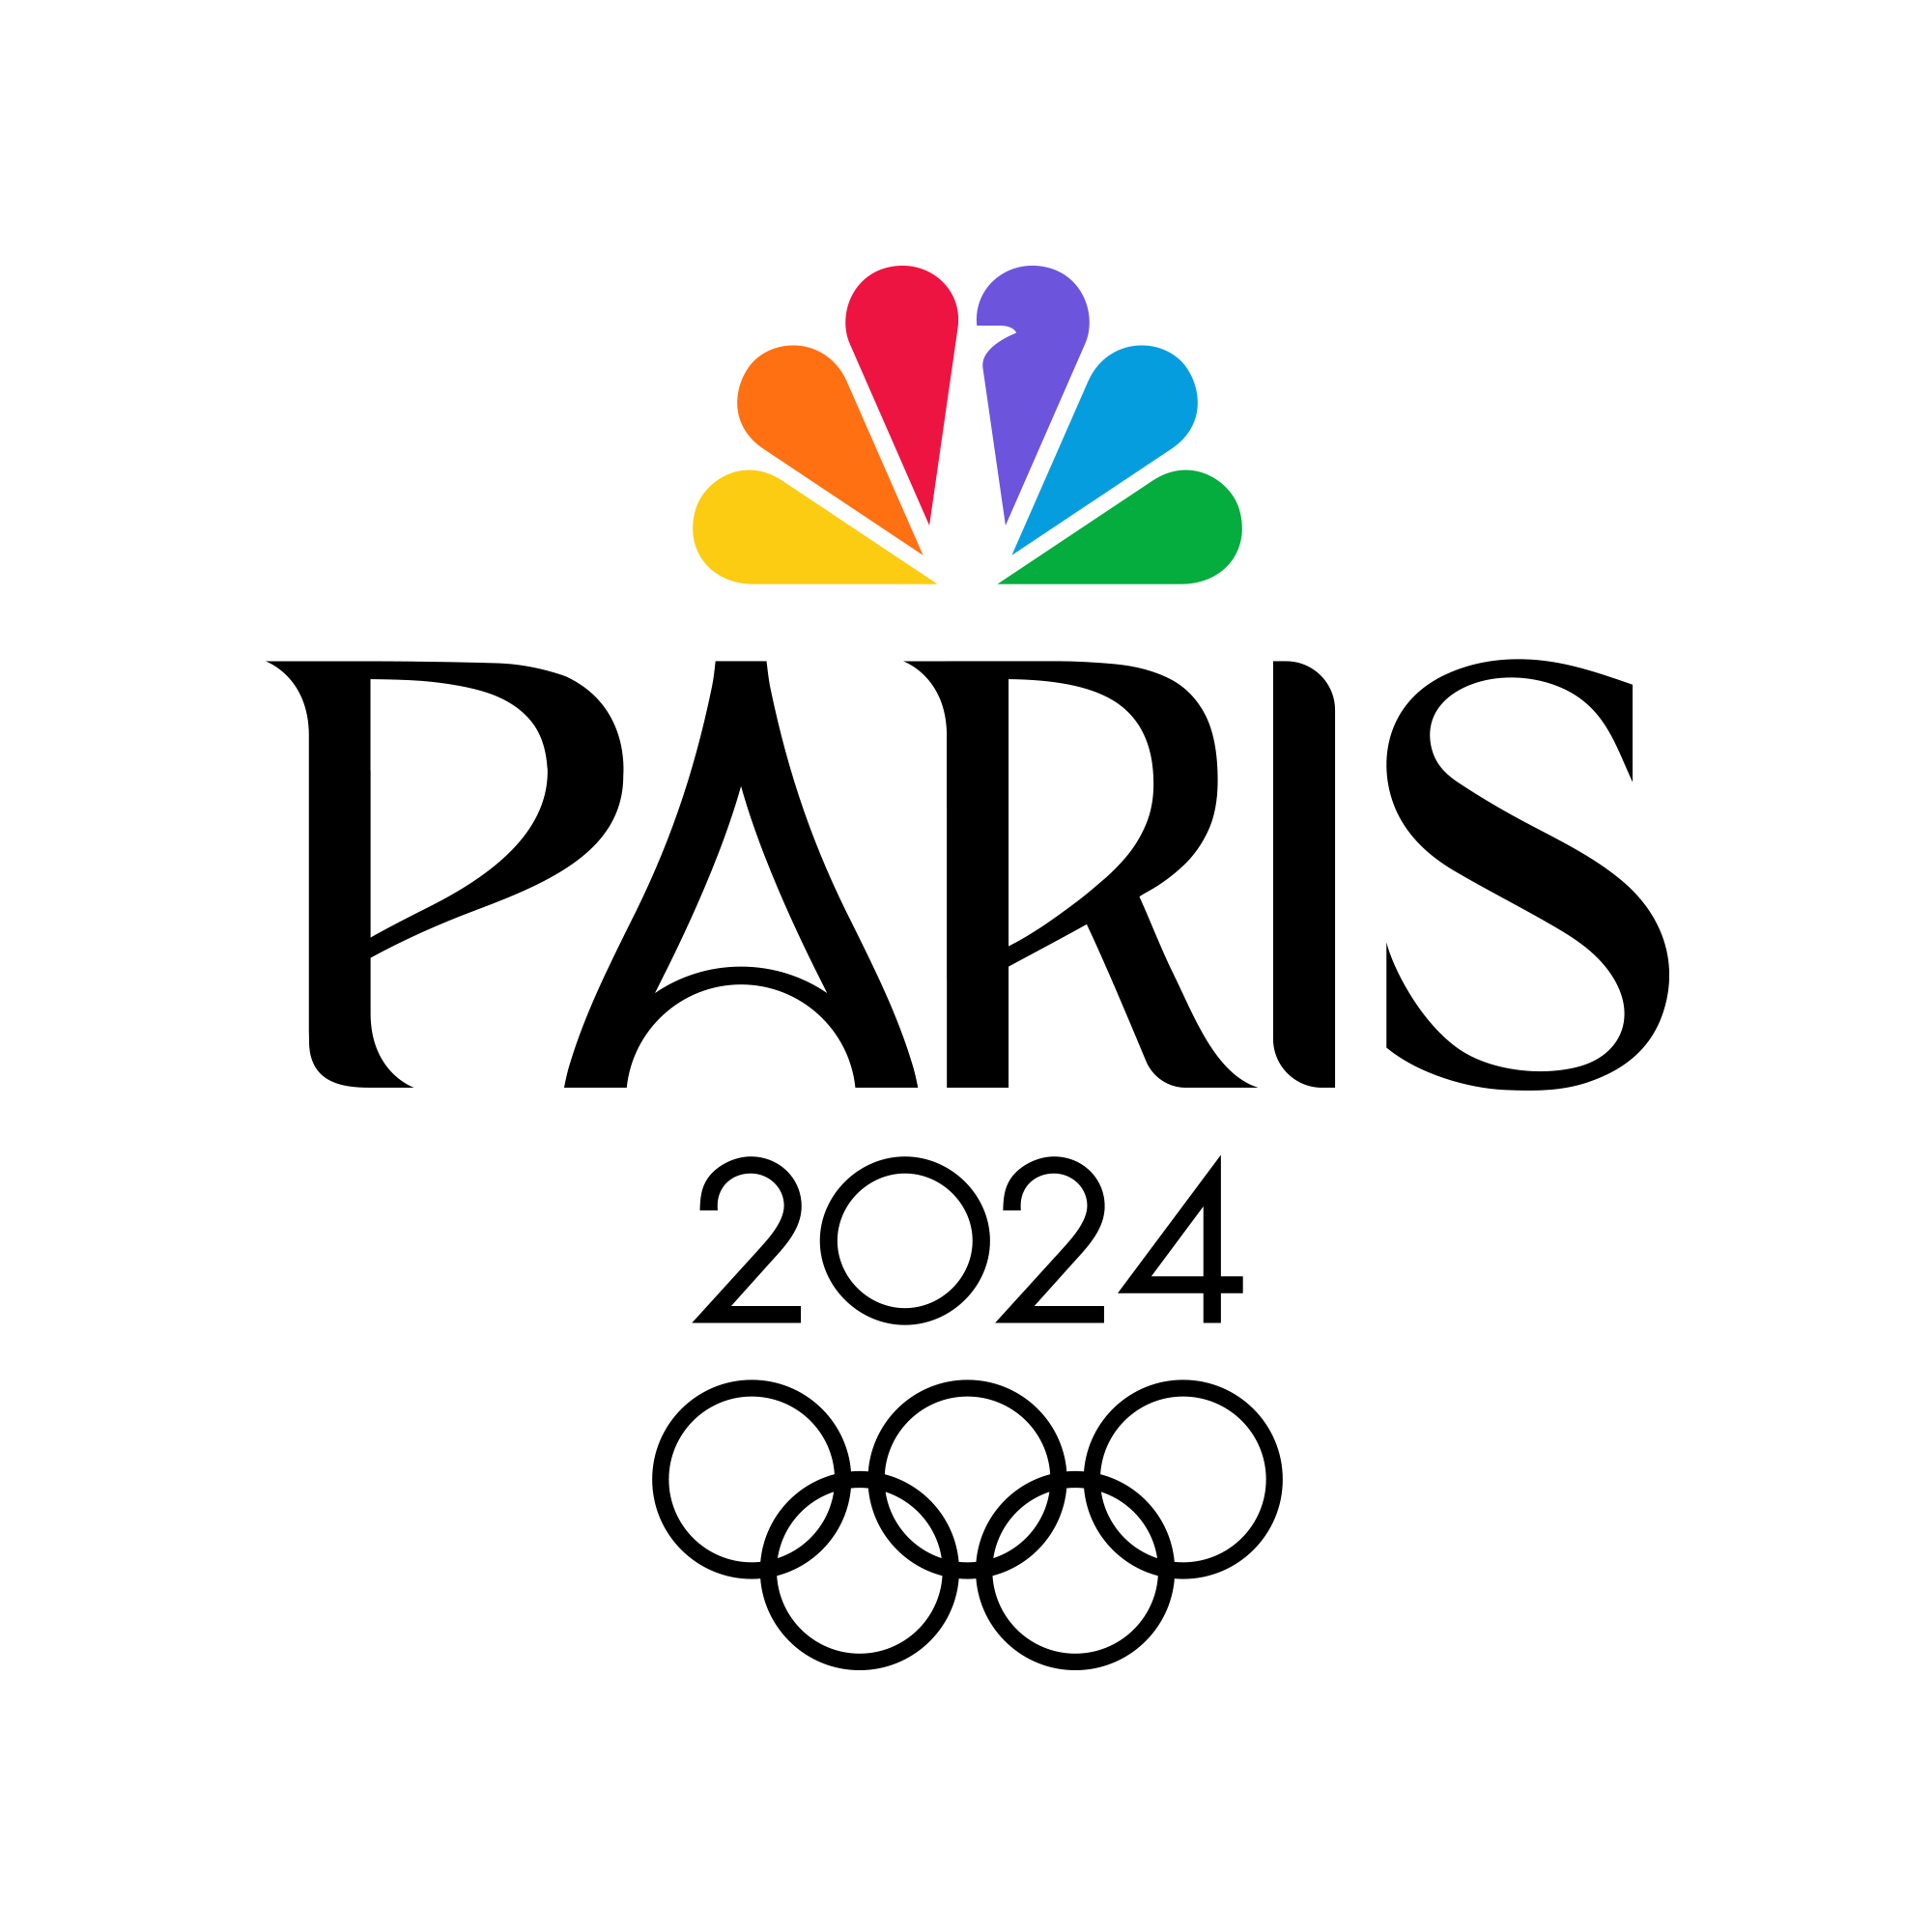 NBCUNIVERSAL FORTIFIES OLYMPIC AND PARALYMPIC MEDIA PARTNERSHIPS WITH